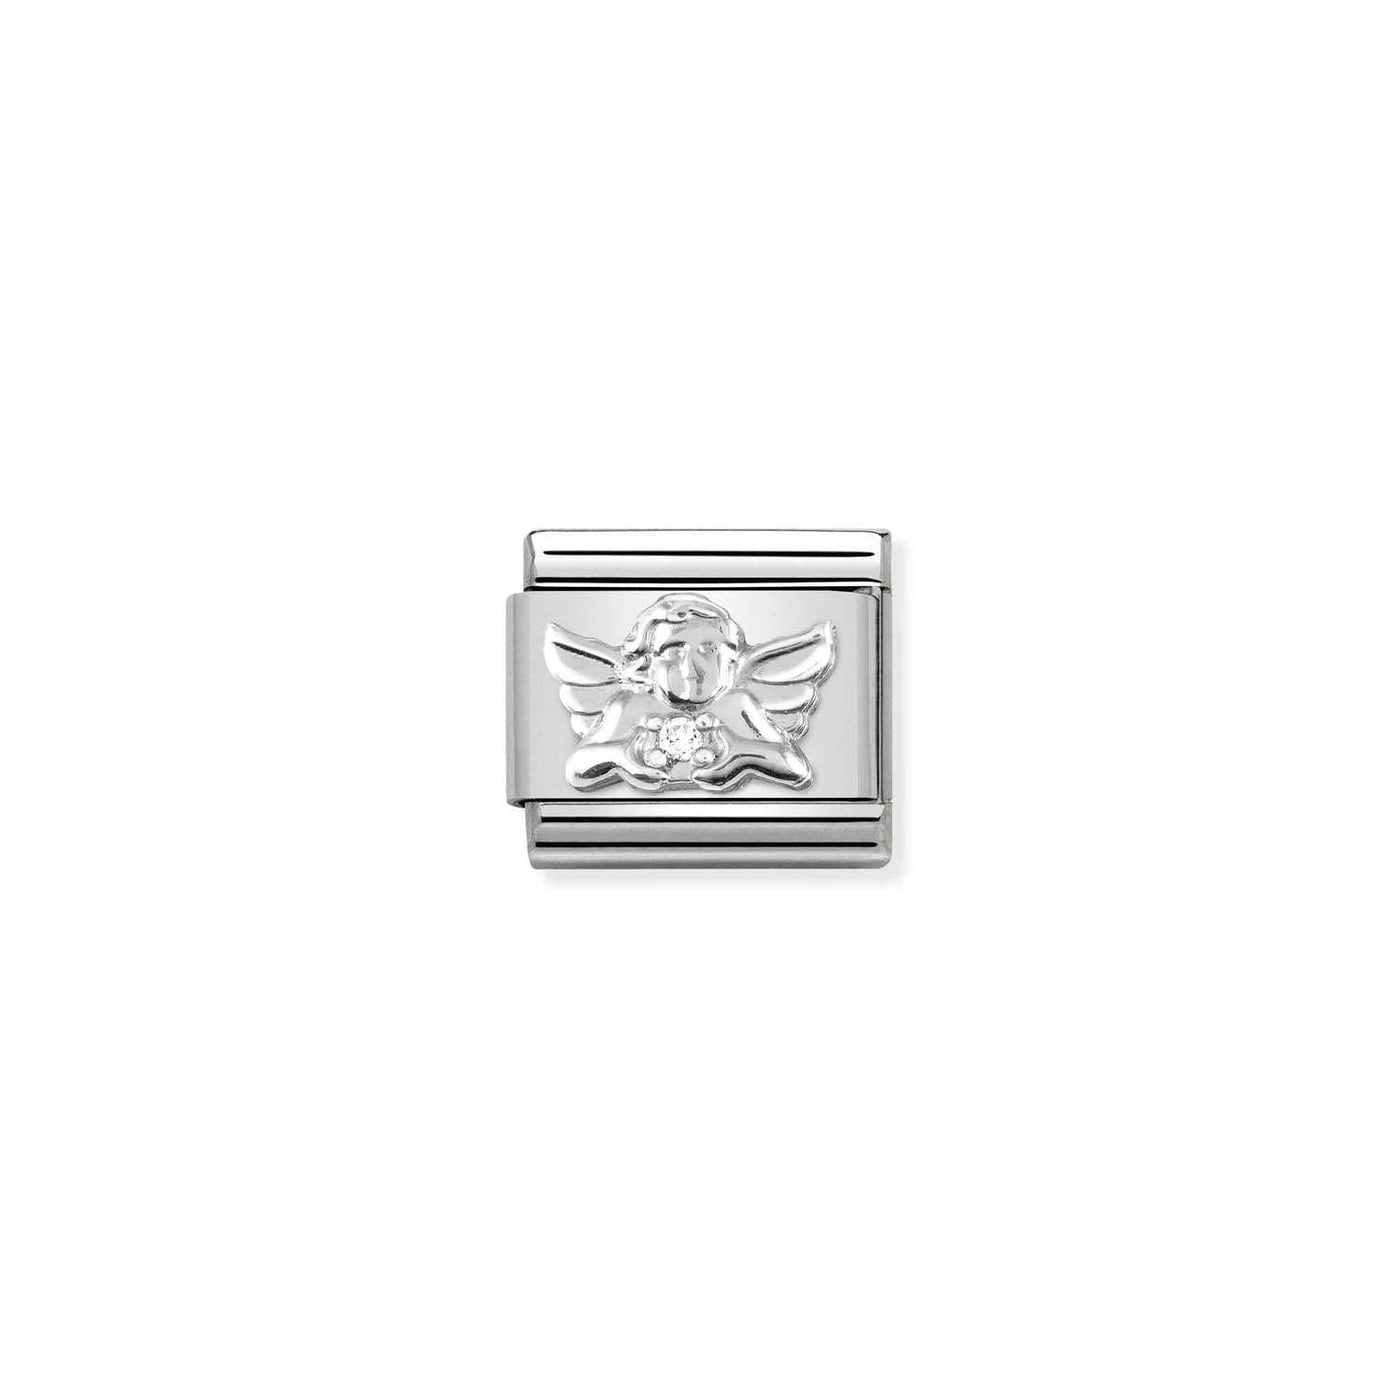 Nomination Classic Silver Cubic Zirconia Angel Link Charm